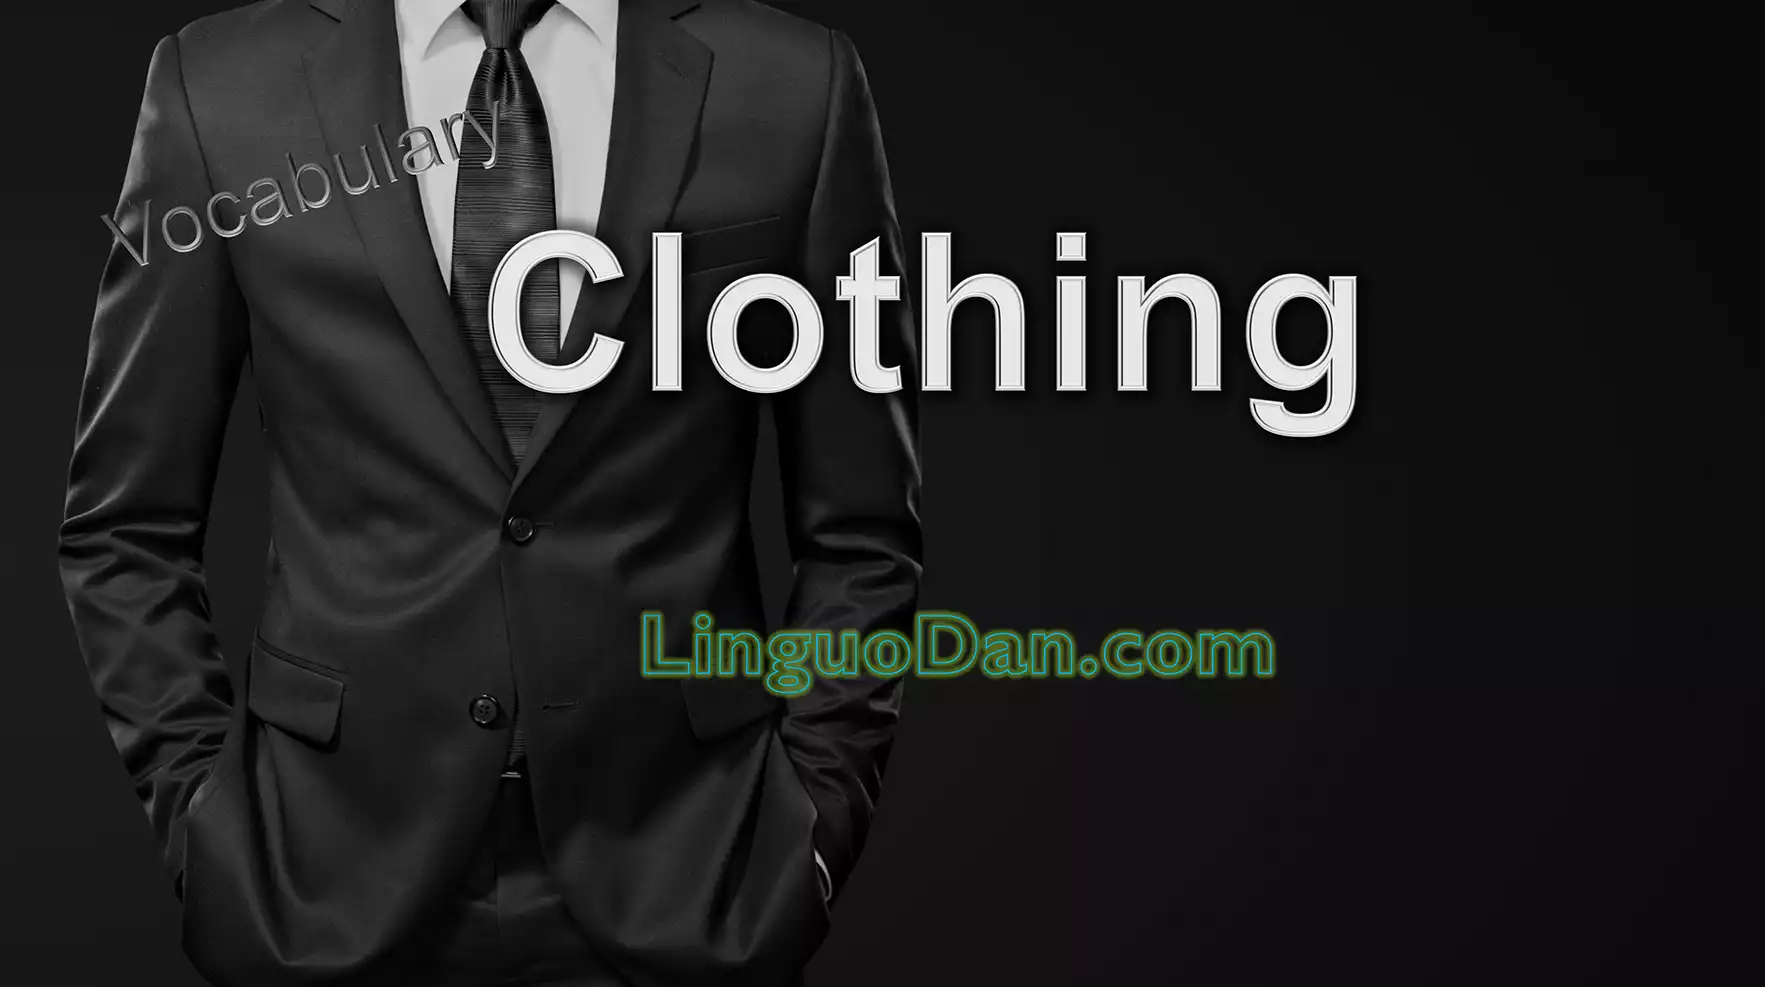 Clothes in English – Basic English Clothes Vocabulary - Names of